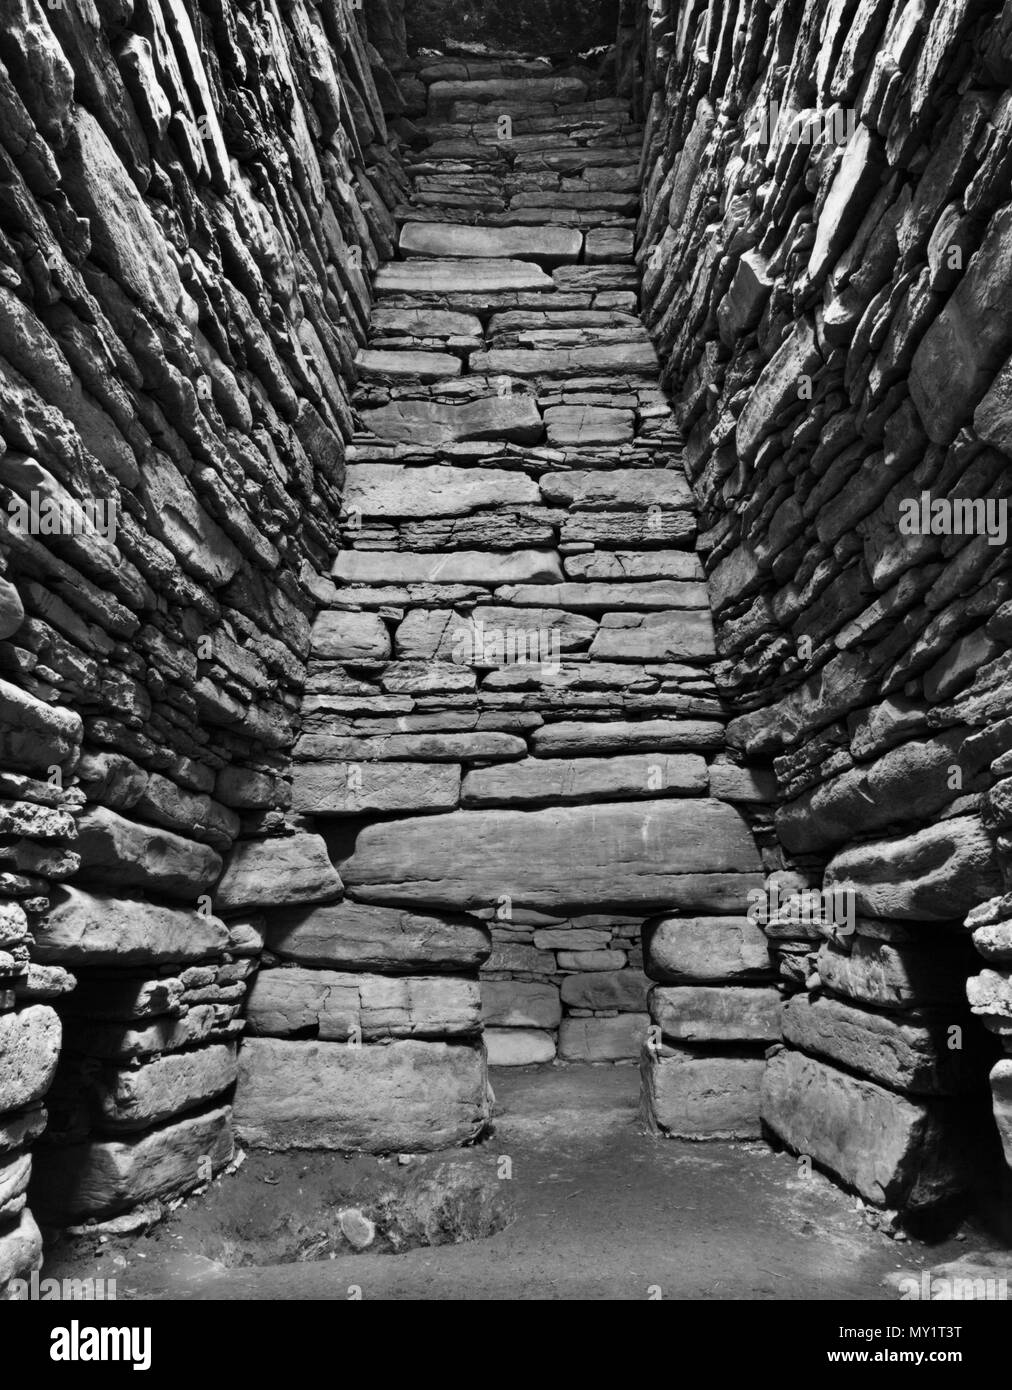 View S of the interior of Quoyness Neolithic chambered cairn, Sanday, Orkney, UK, showing entrances to 3 of the 6 burial cells off the main chamber. Stock Photo